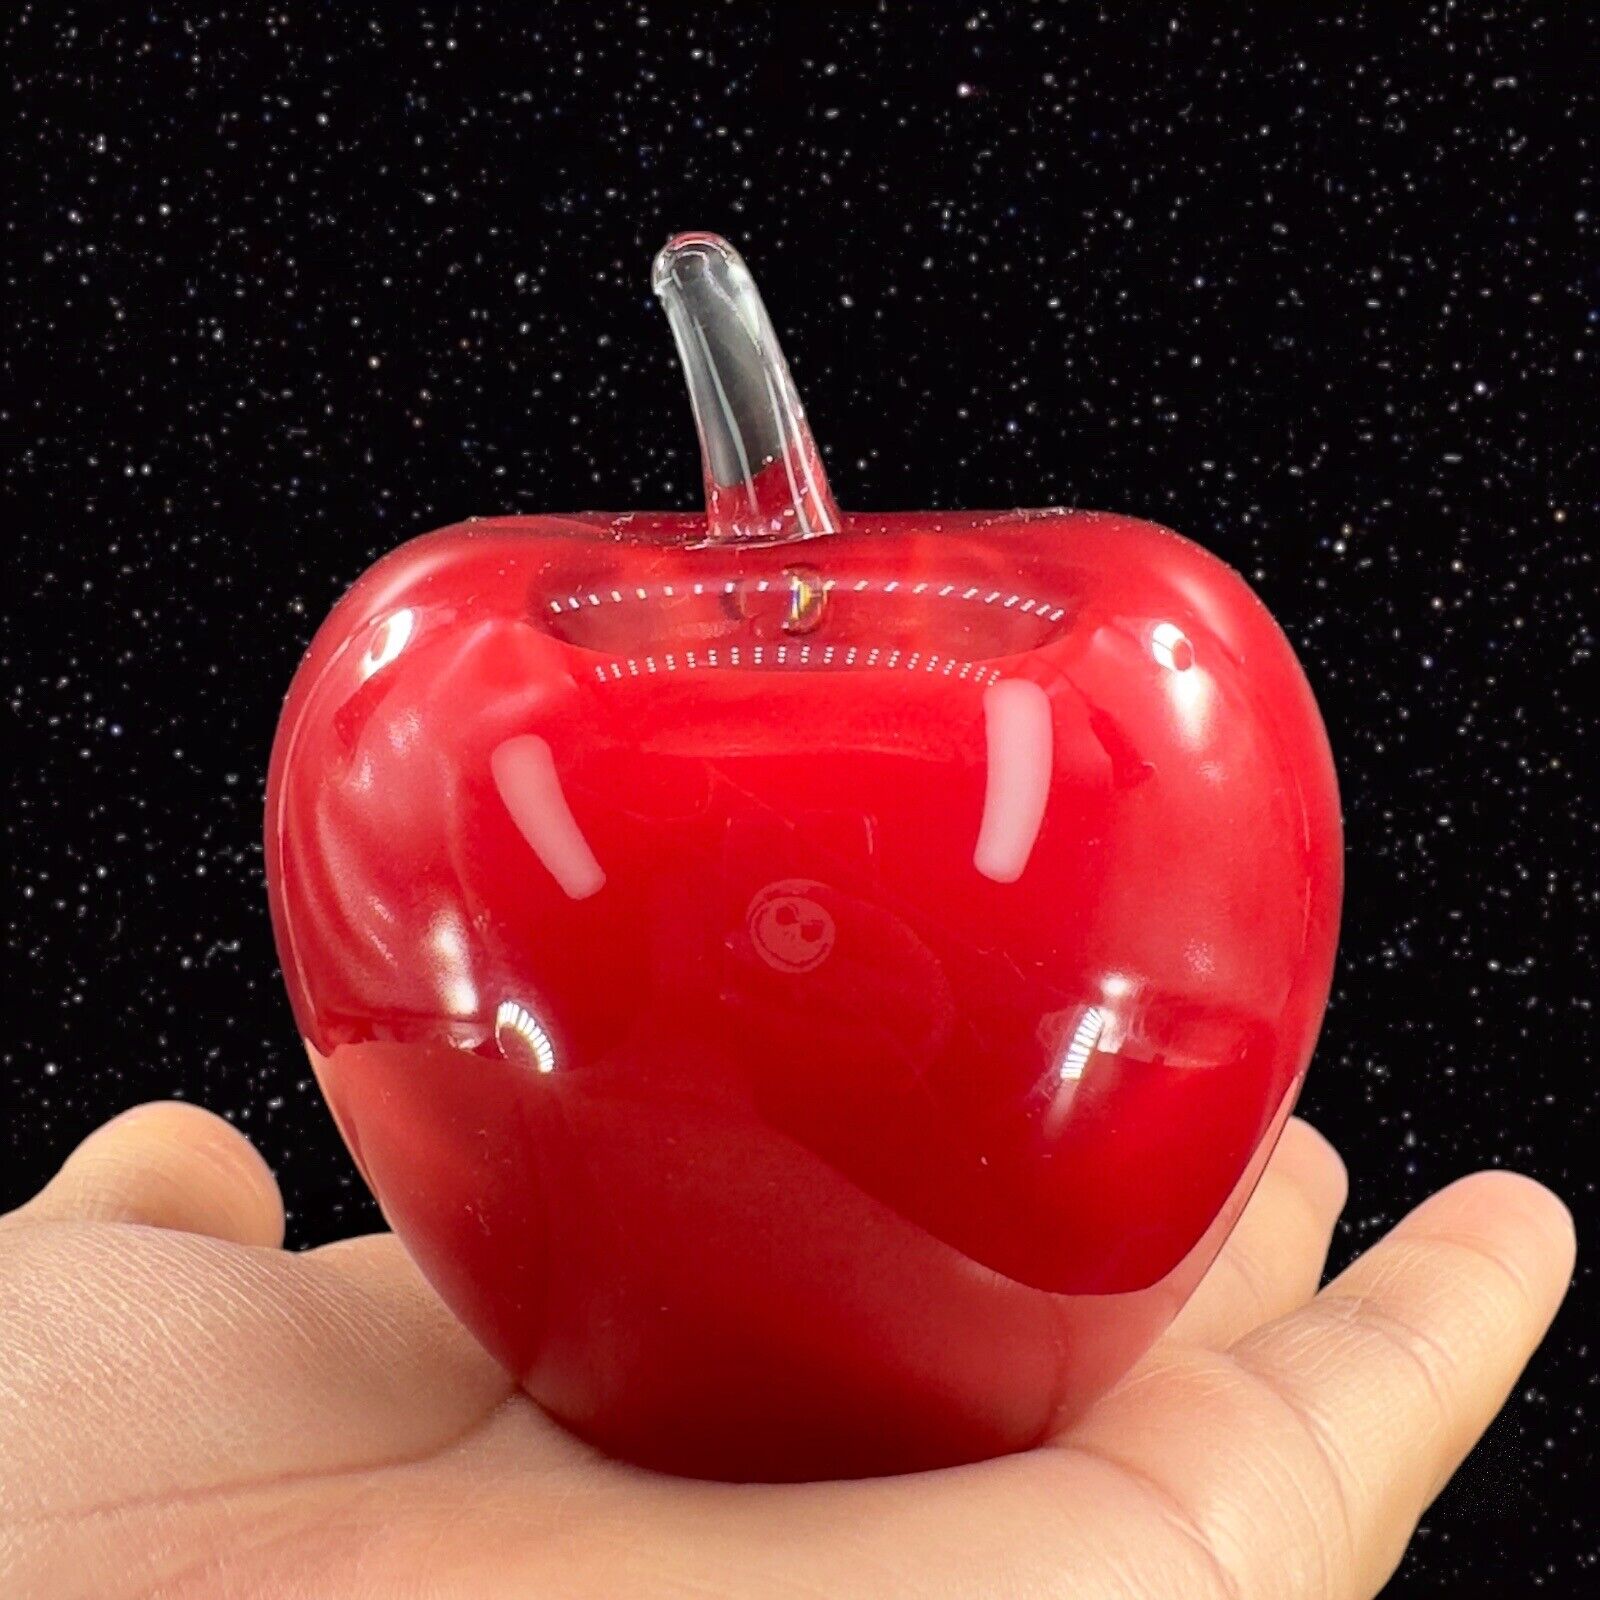 BADASH Red Art Glass Apple Figurine Paperweight Heavy Thick Glass Clear Stem VTG